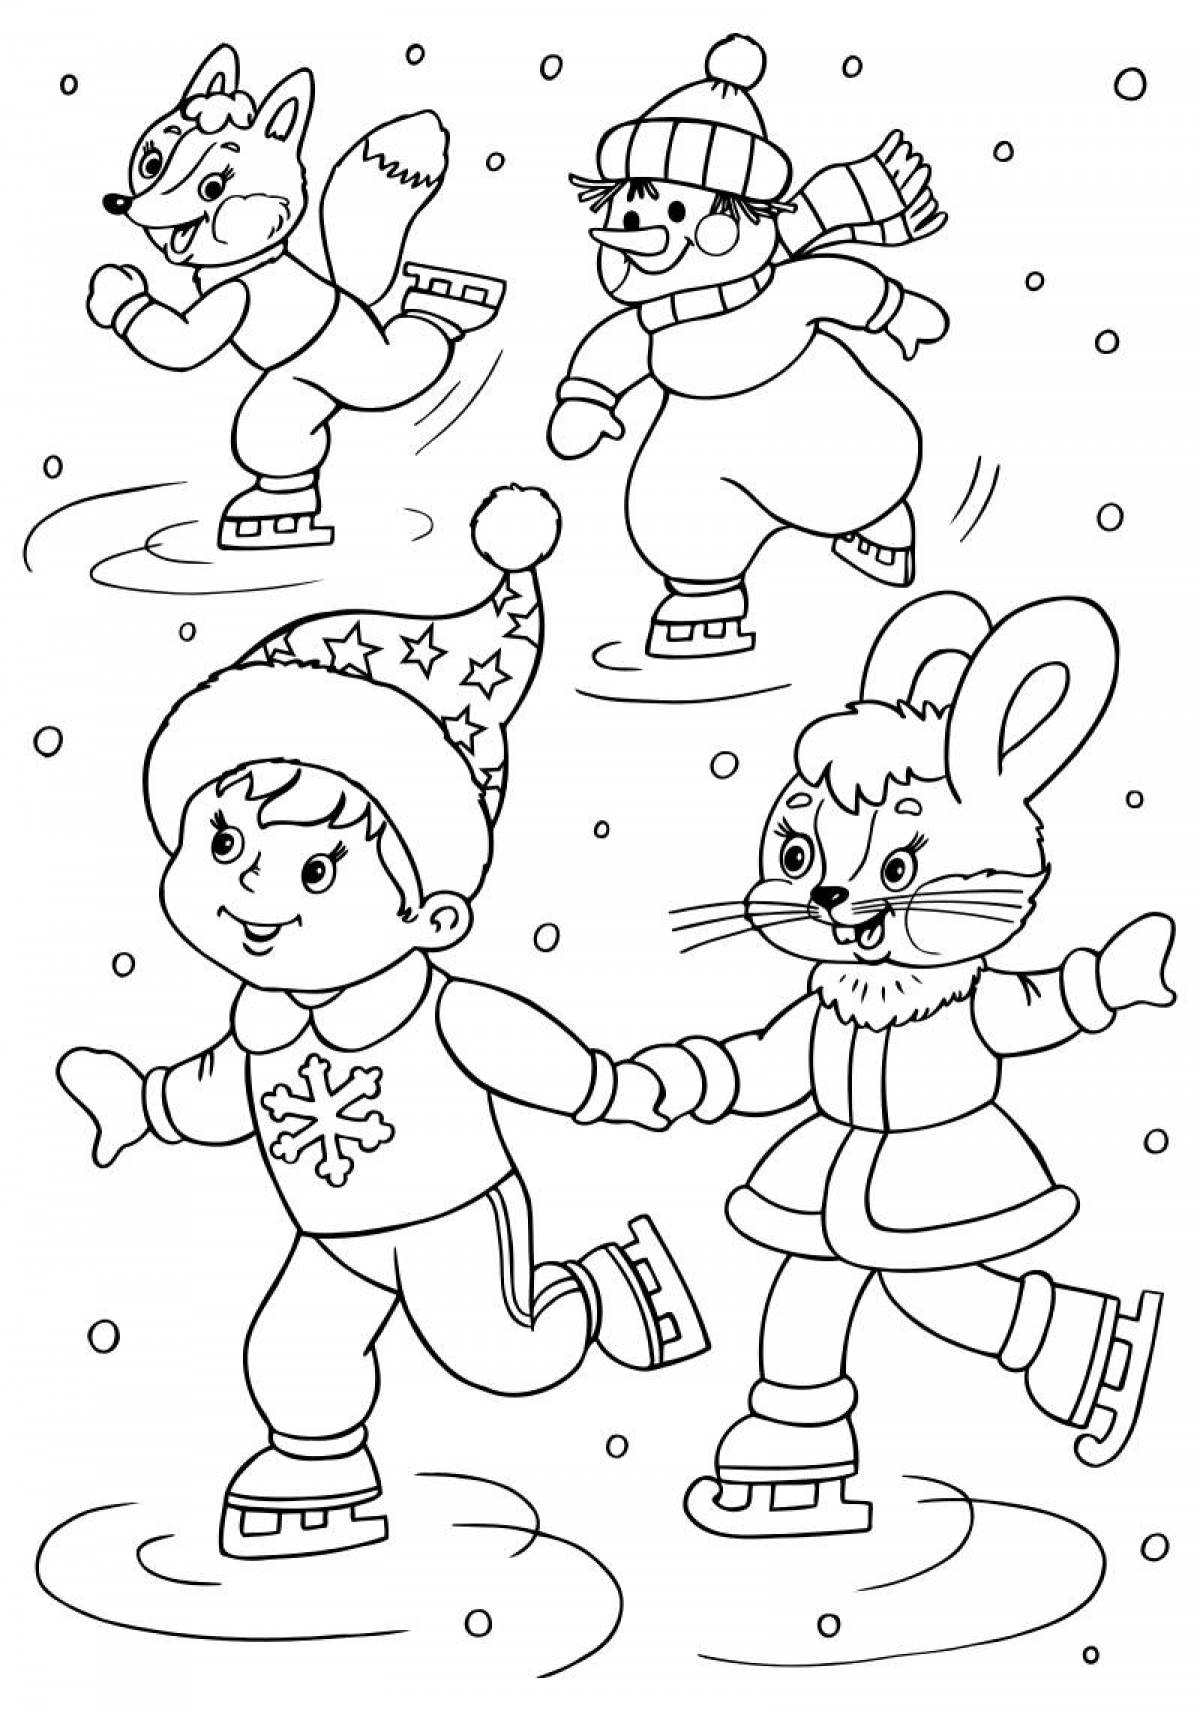 Major winter coloring book for children 6-7 years old